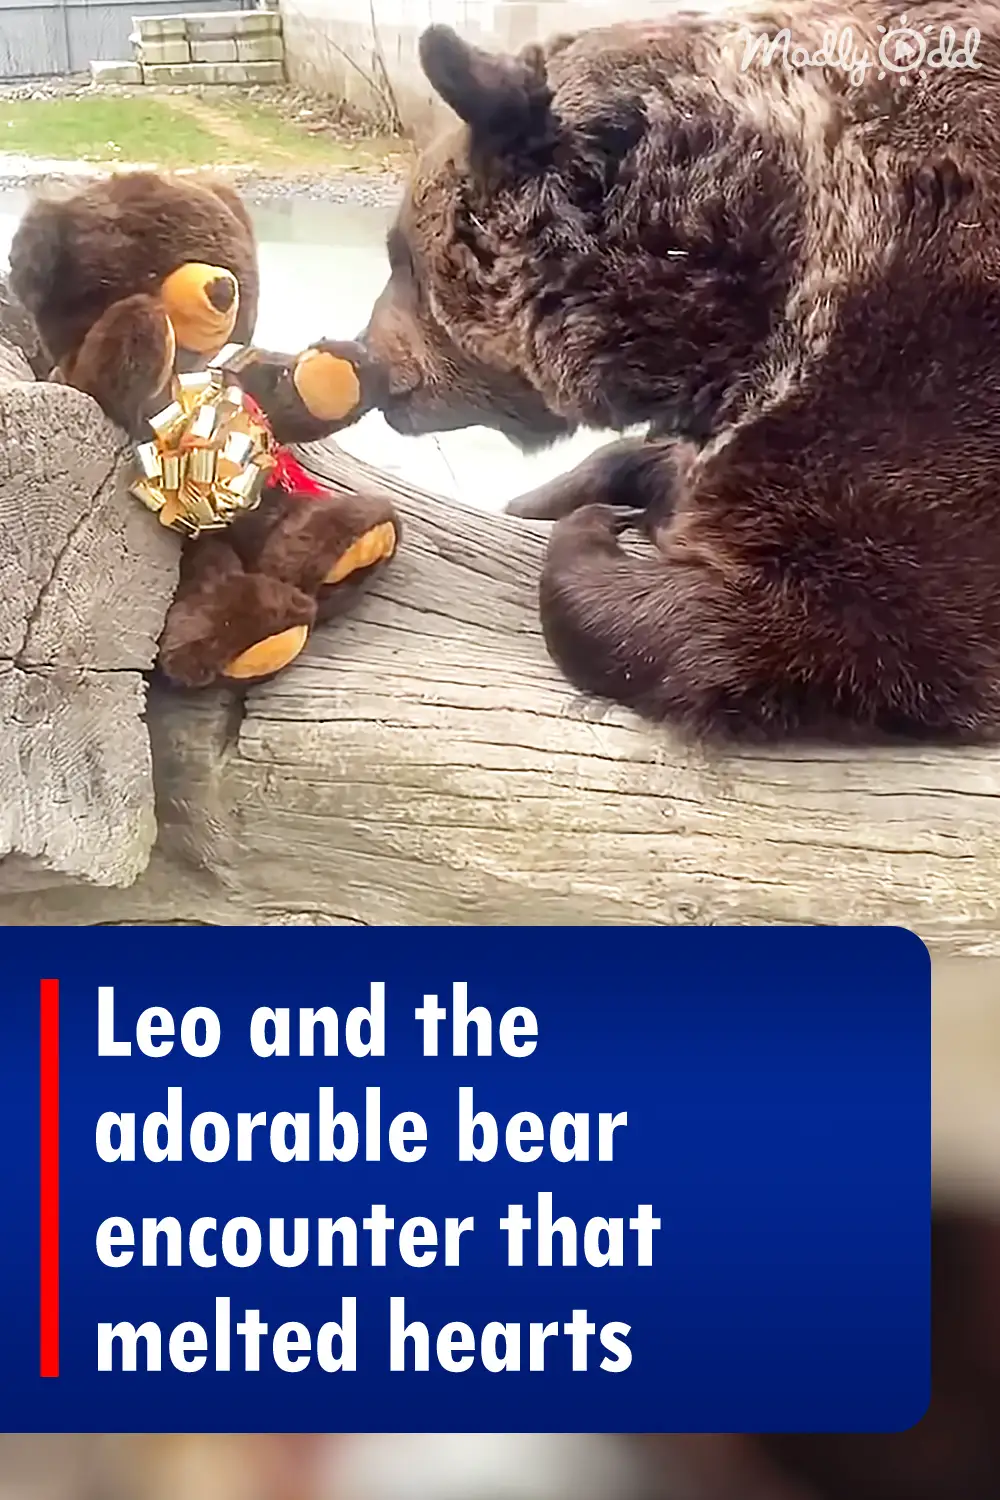 Leo and the adorable bear encounter that melted hearts